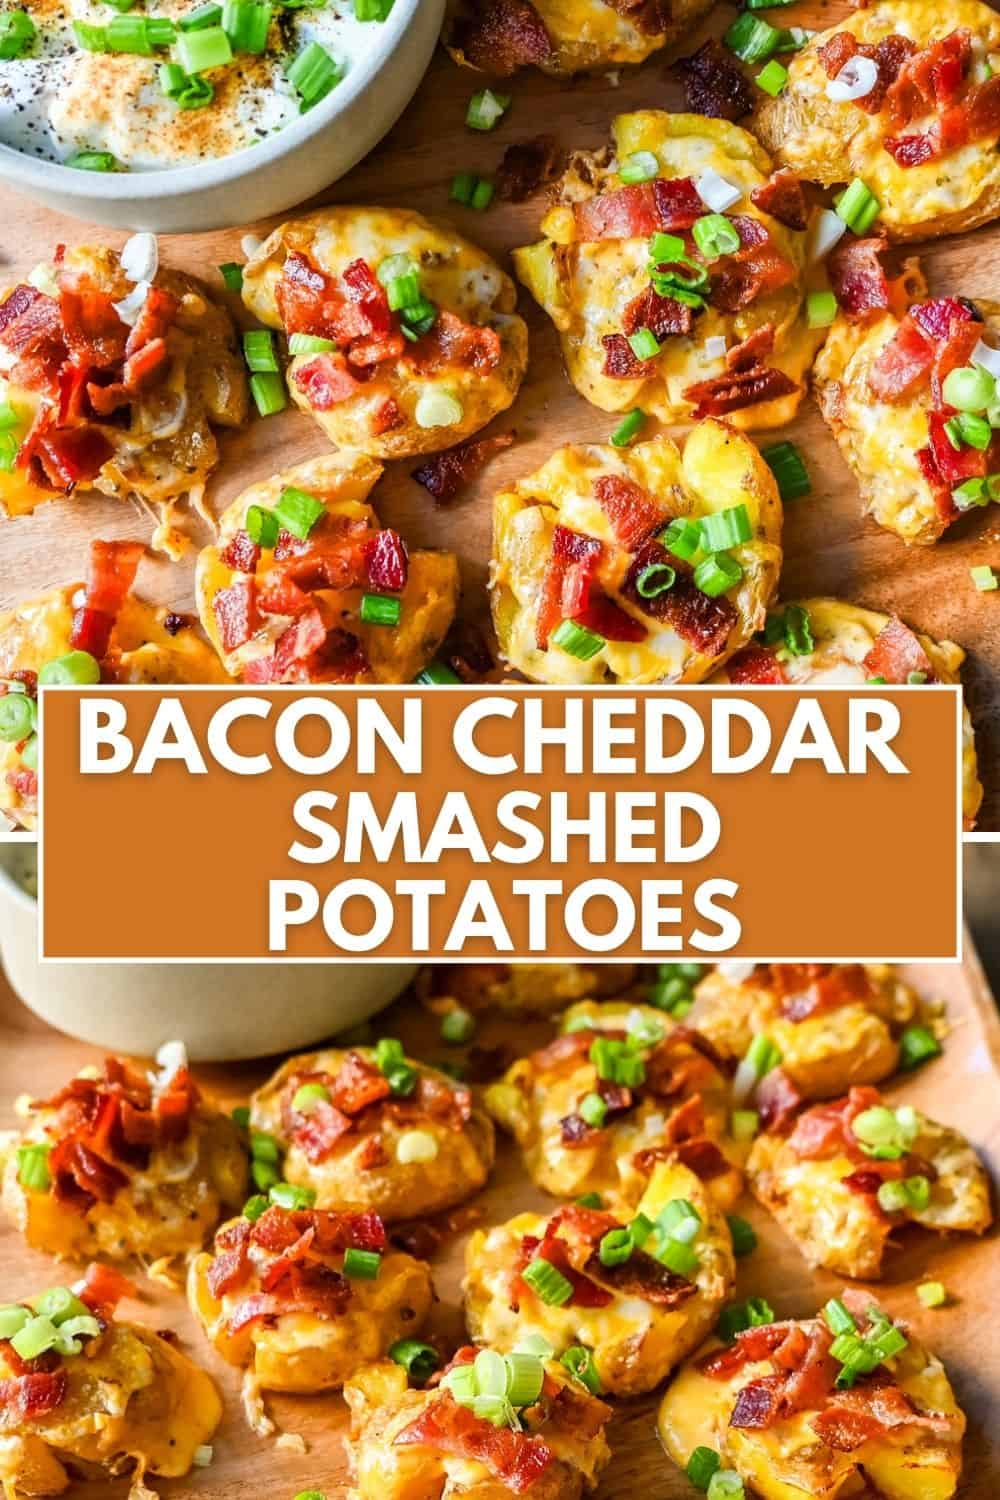 Loaded Bacon Cheddar Smashed Potatoes. These bacon cheddar loaded smashed potatoes start with crispy and buttery smashed potatoes topped with bacon, cheddar cheese, and green onions. These loaded smashed potatoes are the perfect side dish.